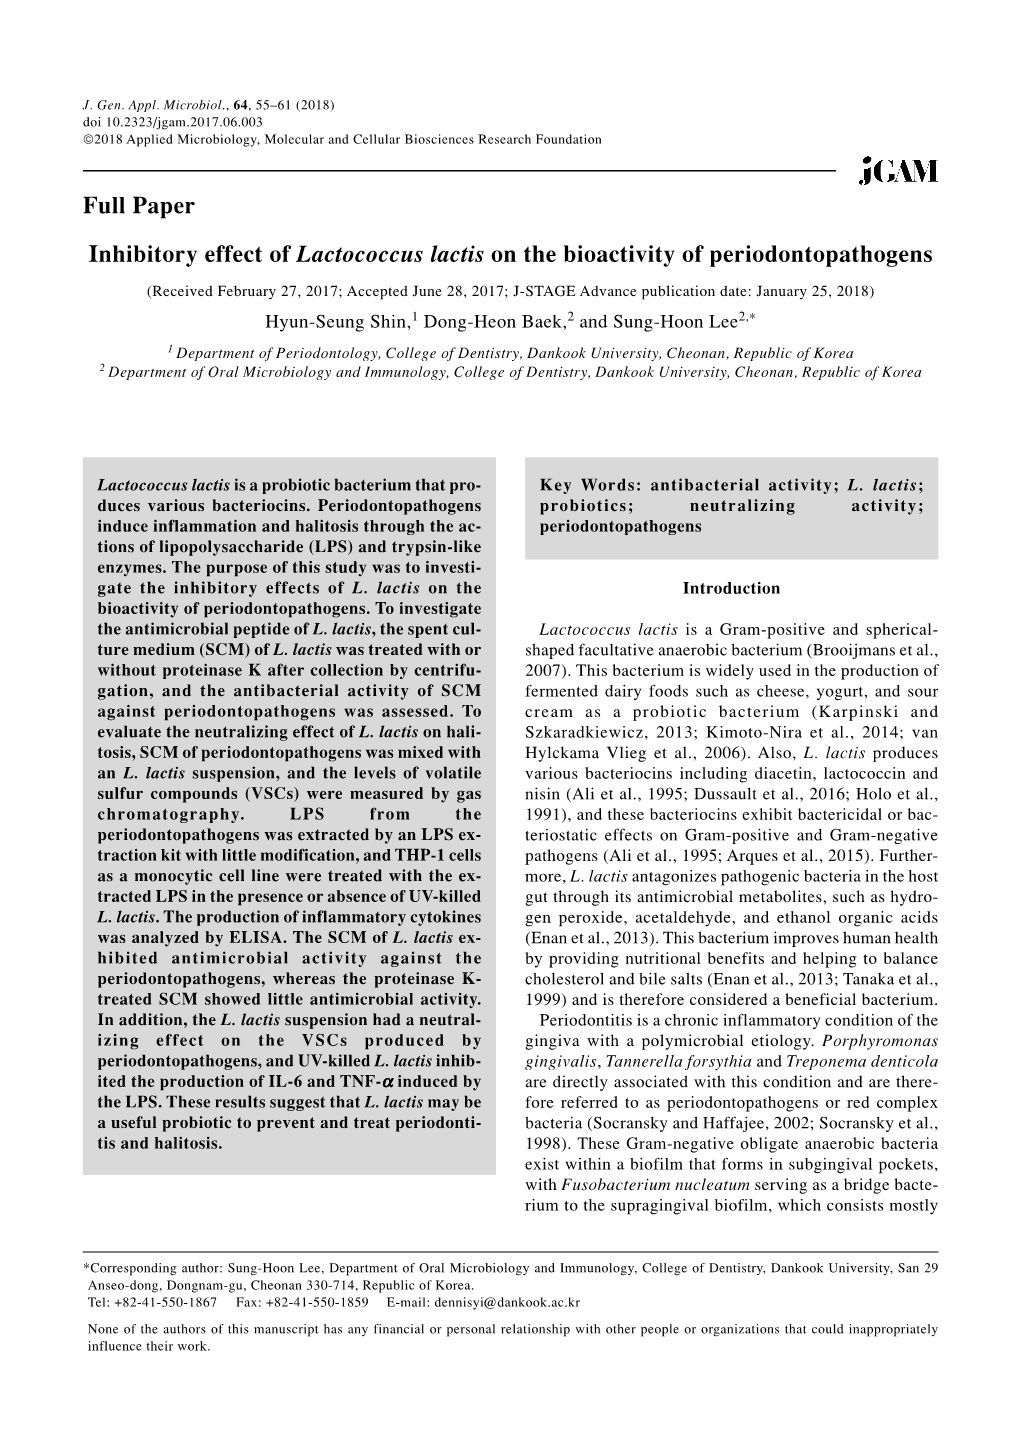 Inhibitory Effect of Lactococcus Lactis on the Bioactivity of Periodontopathogens